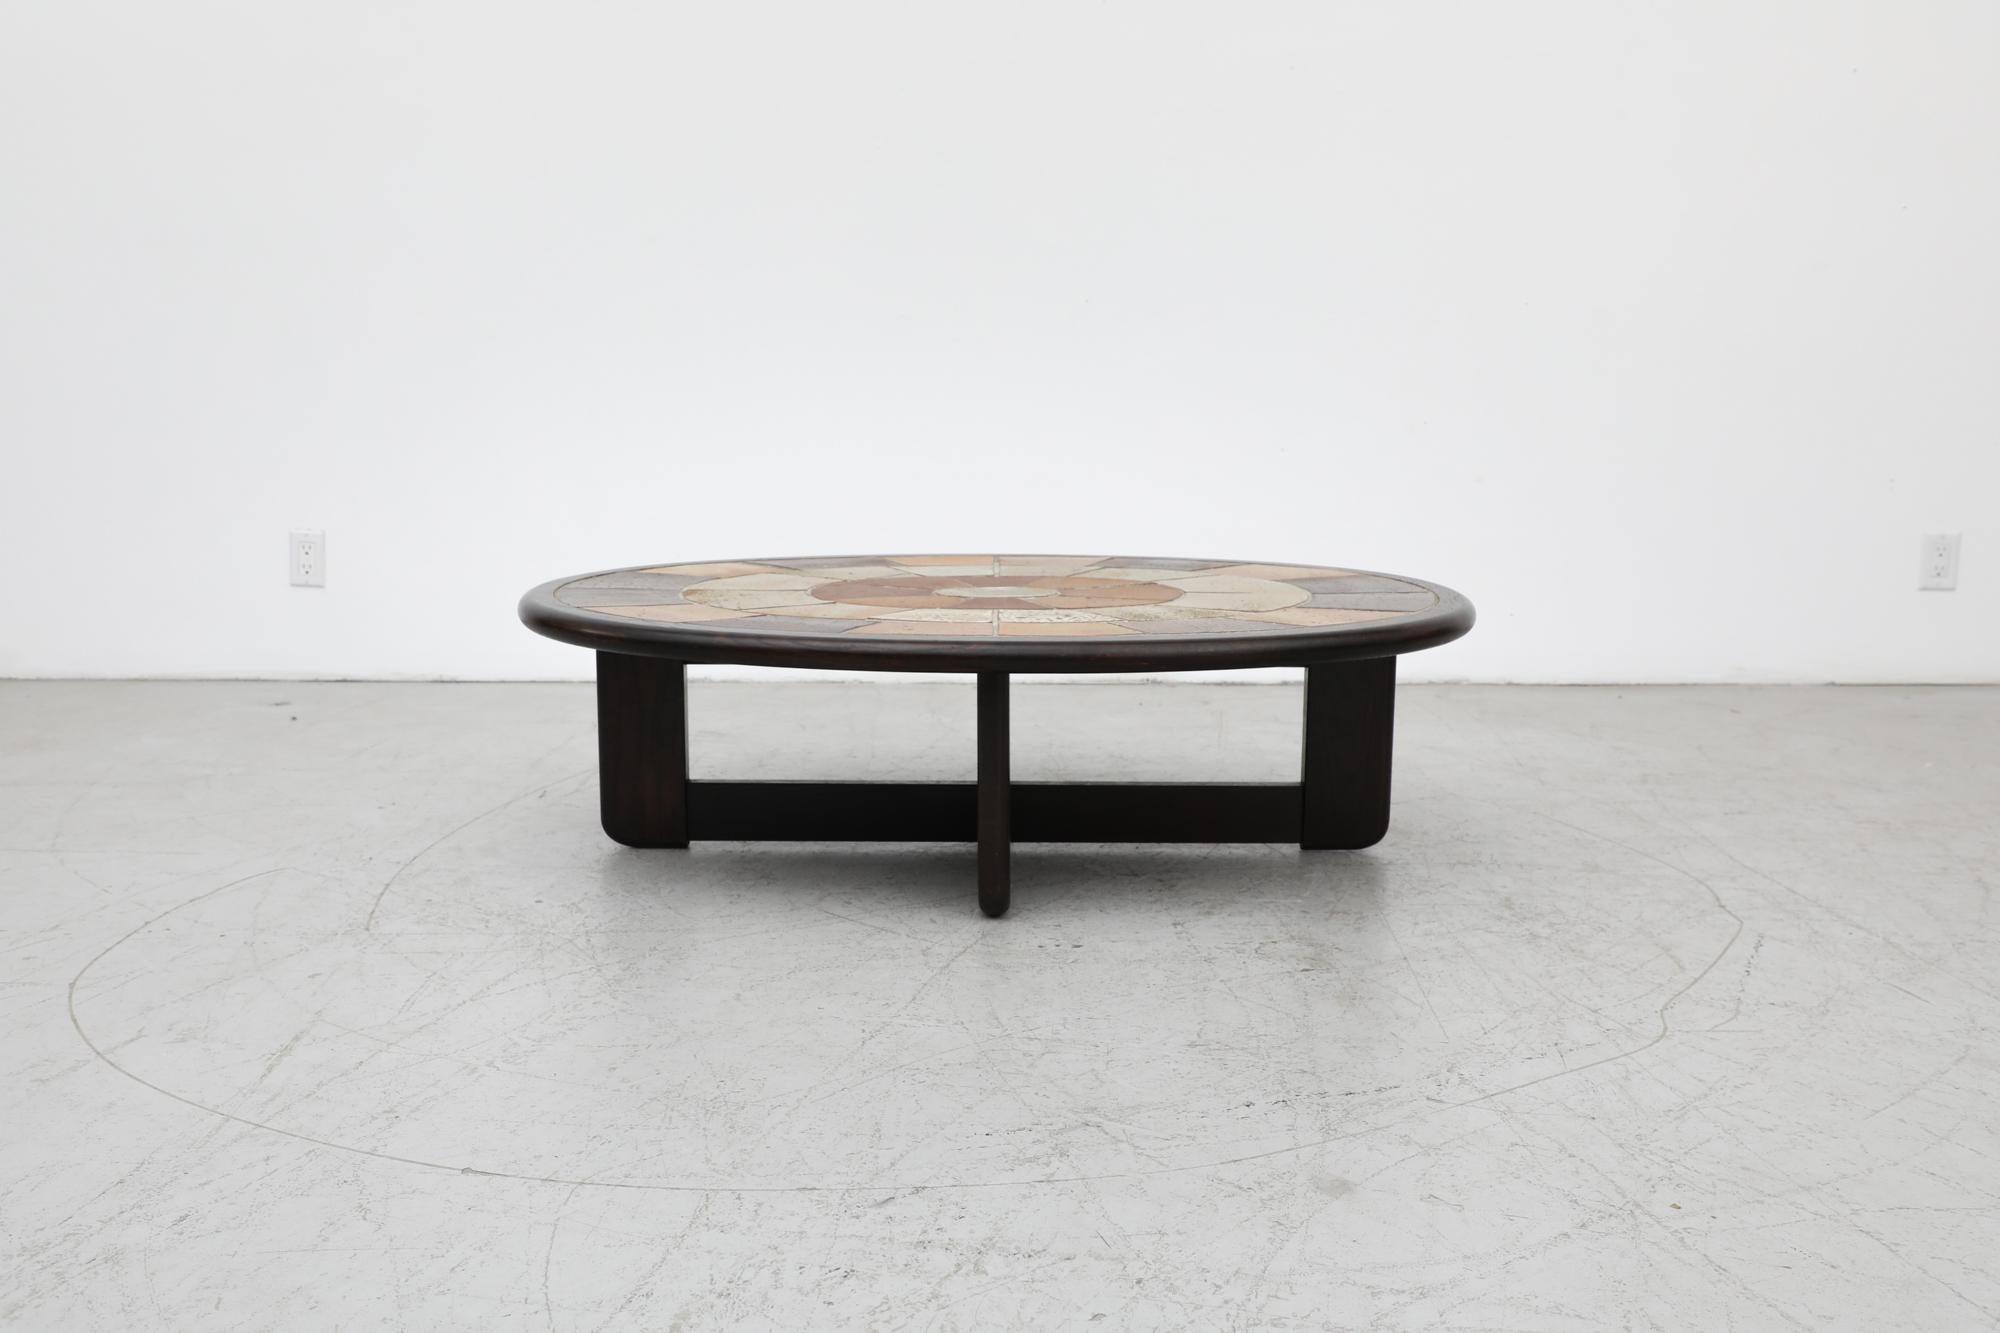 Mid-Century oval ceramic tile coffee table by Tue Poulsen for Haslev Mobelsnedkeri. Roger Capron style 1960's Danish artisan coffee table with ceramic inset tiles and a sold oak frame. Tue Poulsen, mostly known as a sculptor and ceramicist, designed